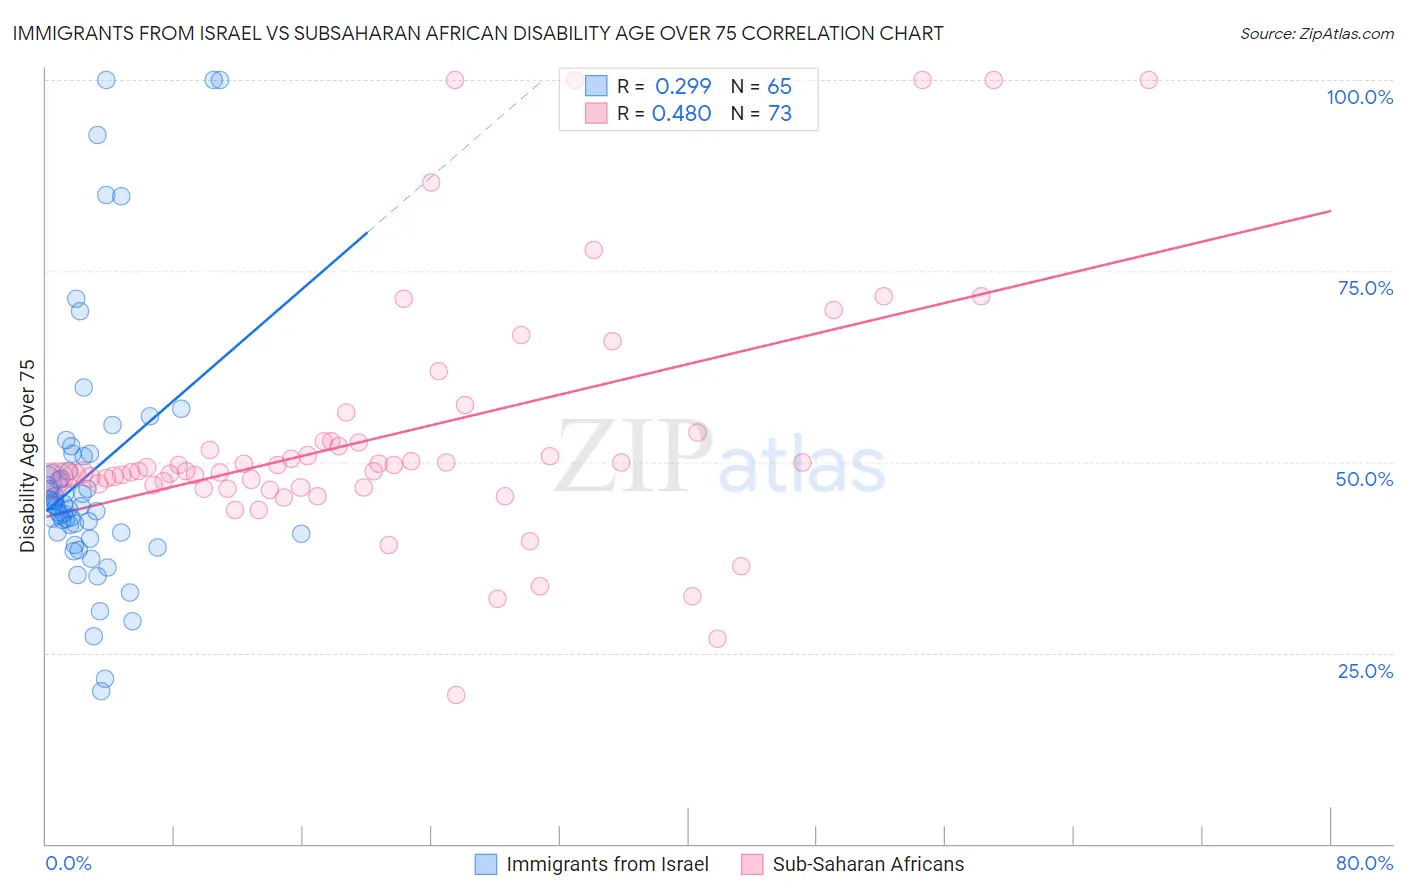 Immigrants from Israel vs Subsaharan African Disability Age Over 75